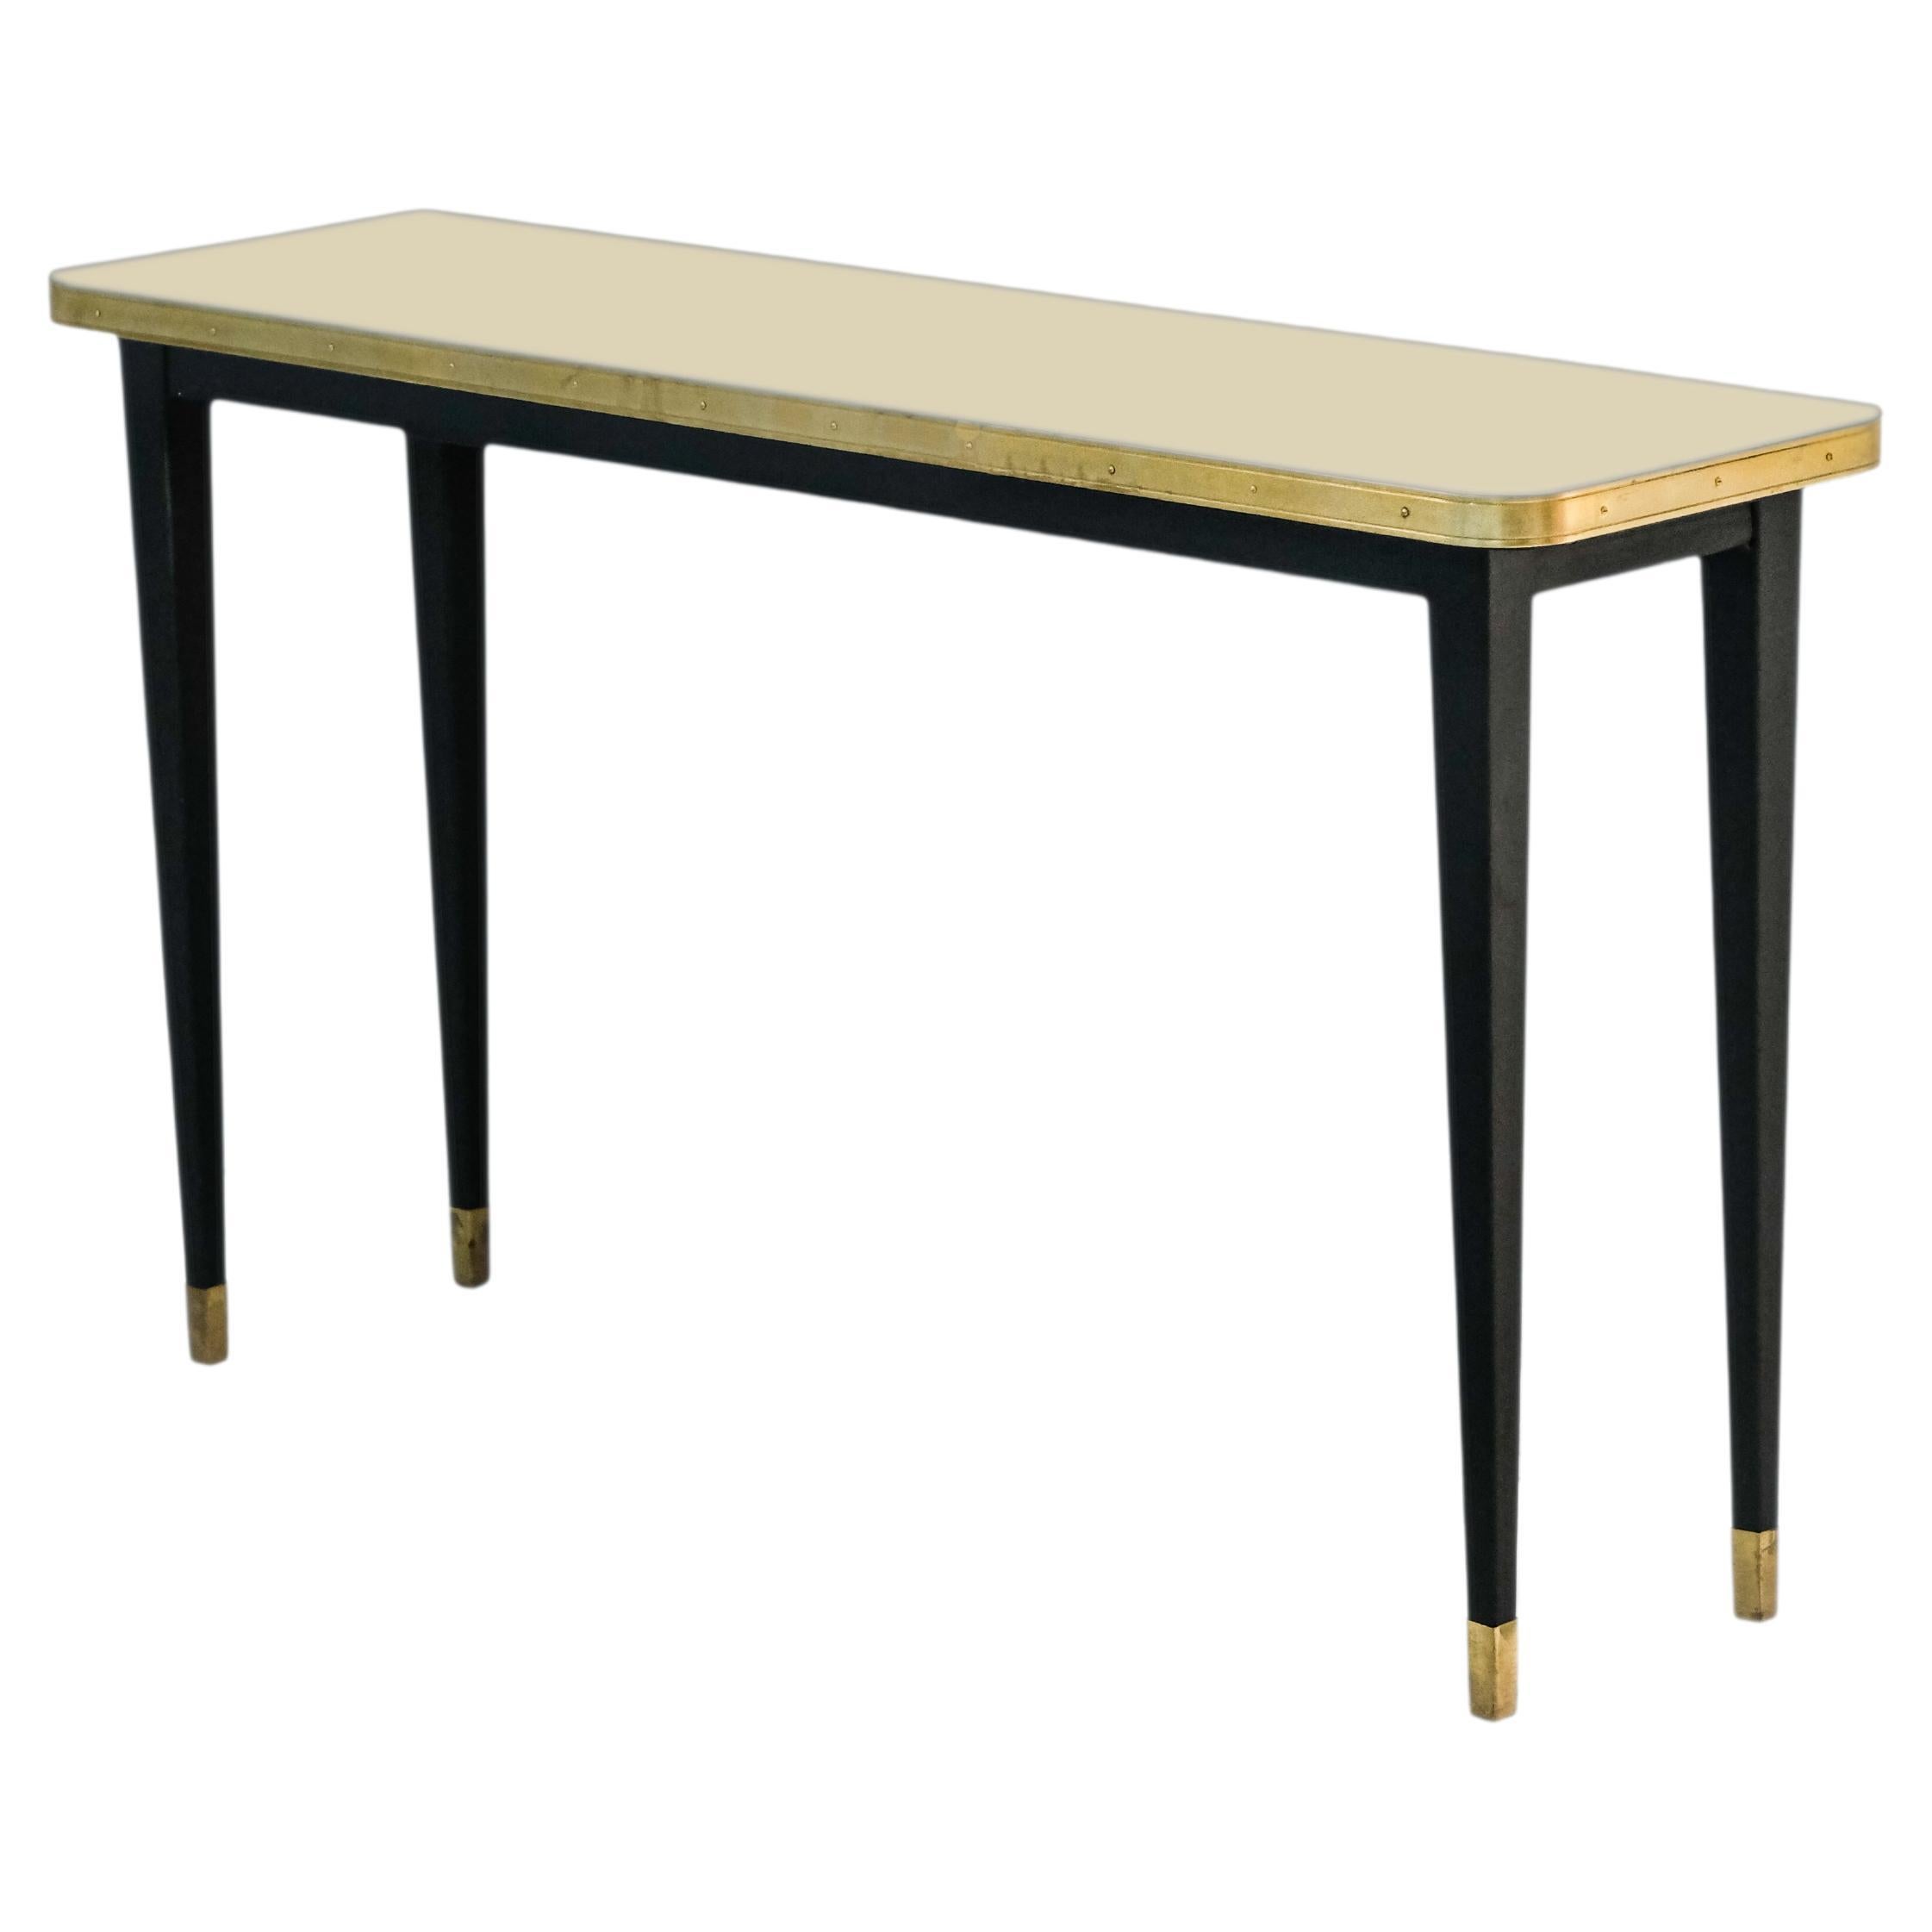 Julieta Collection. 

Console Table with High Gloss Top, Brass Tape Framed, Black Powder Coating Conical Legs with Brass End

Introducing the stunning console table with black powder-coated steel construction, boasting sleek conical legs with brass